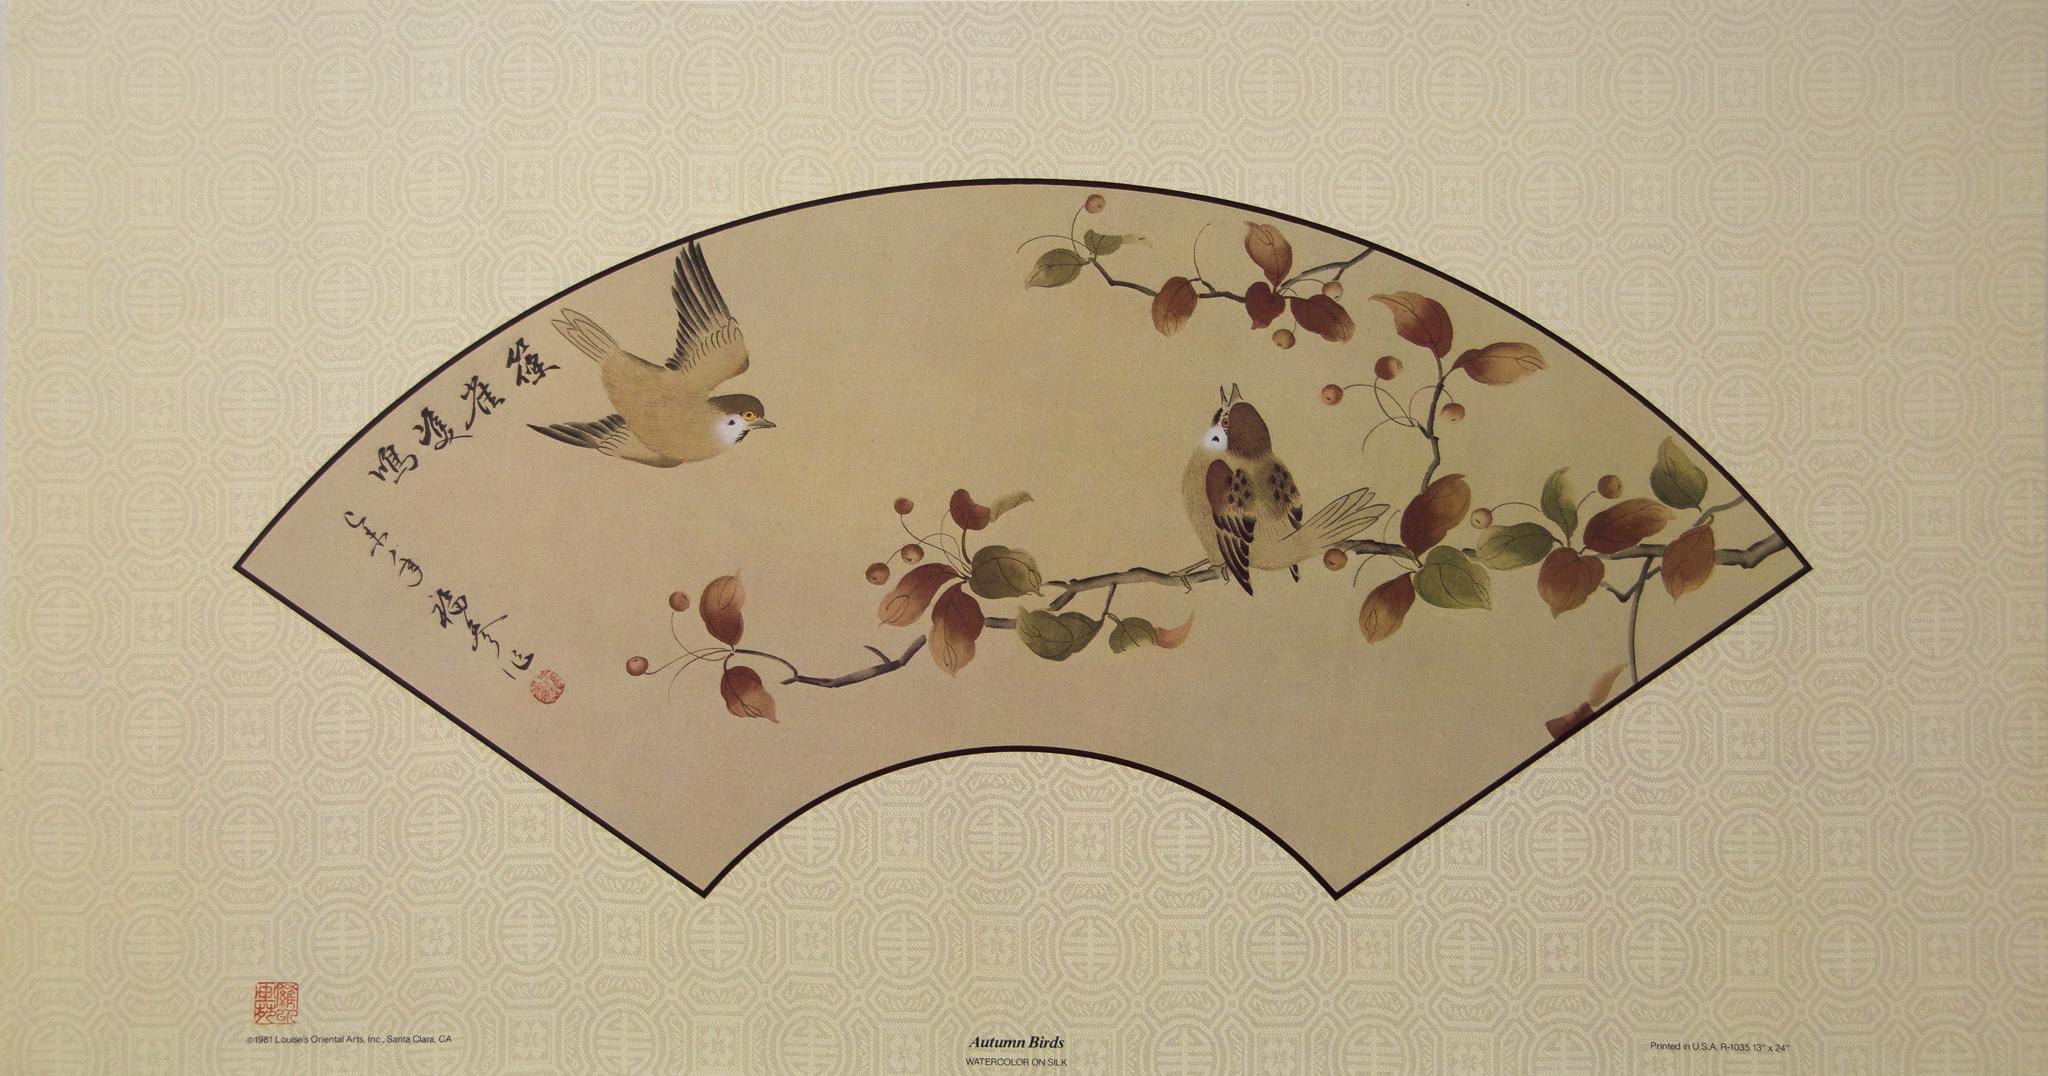 "Autumn Birds" by Unknown Artist
1981 Louise's Oriental Arts
Good Condition
Printed in U.S.A. 
13 x 24 inches. 
